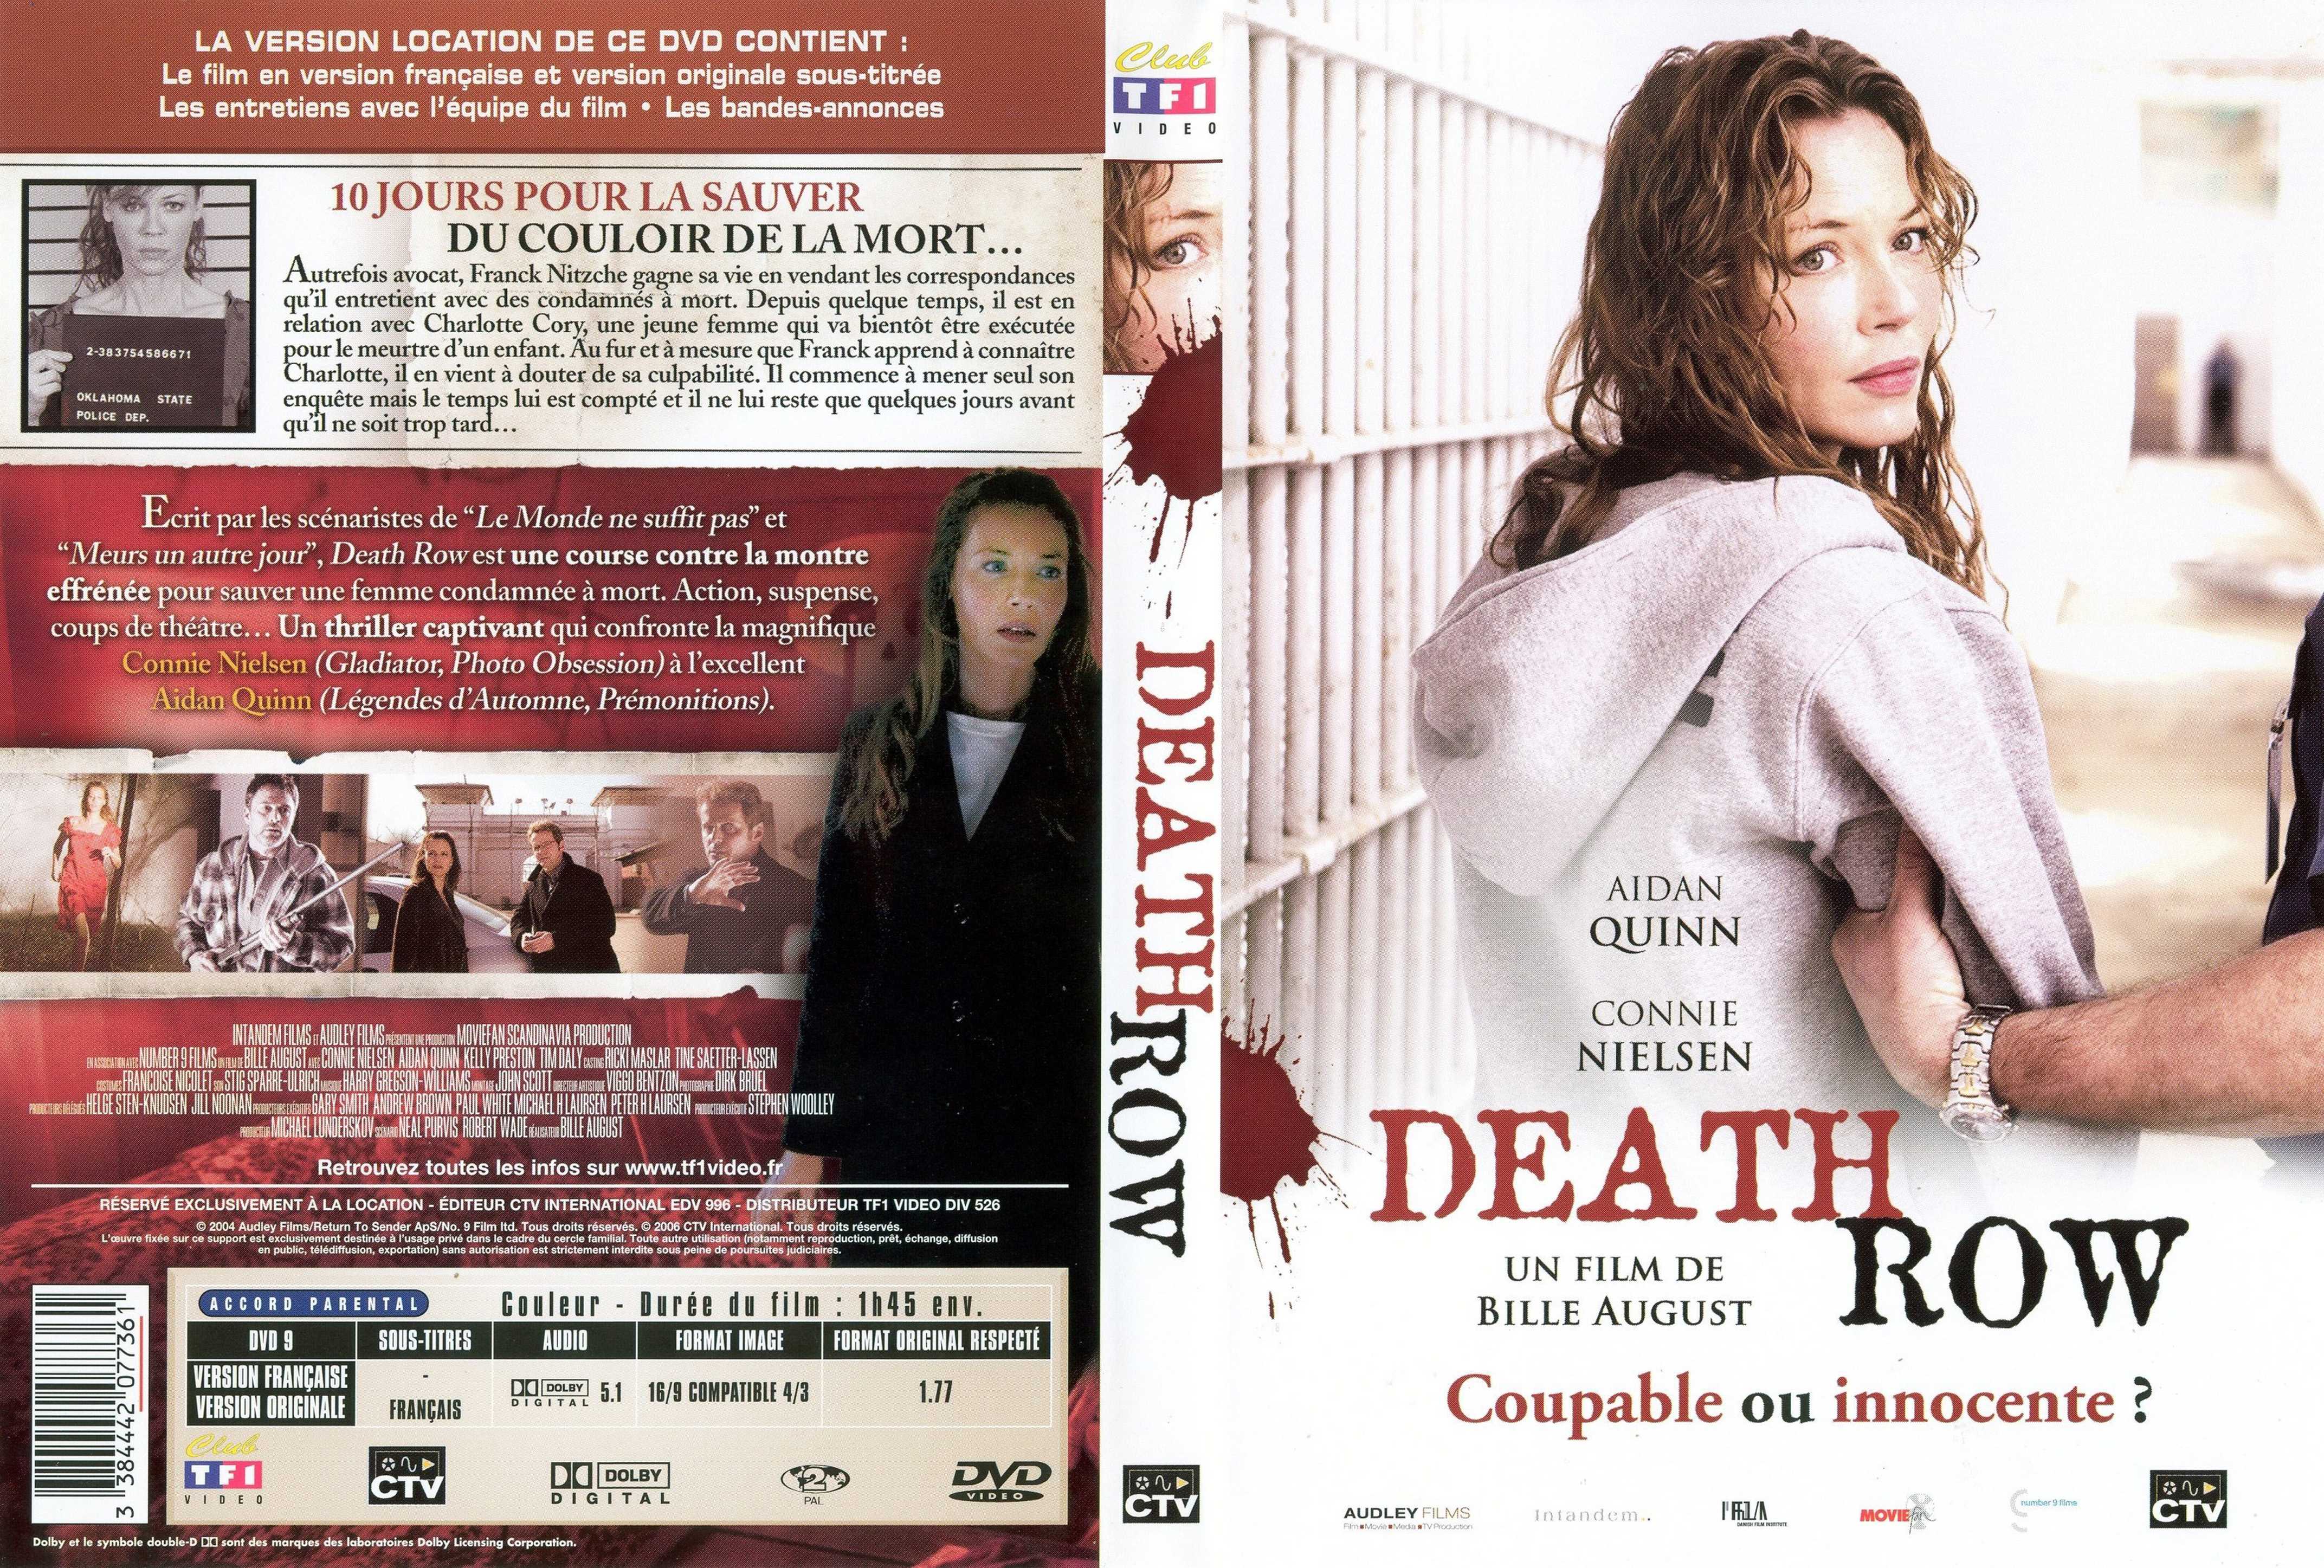 Jaquette DVD Death row